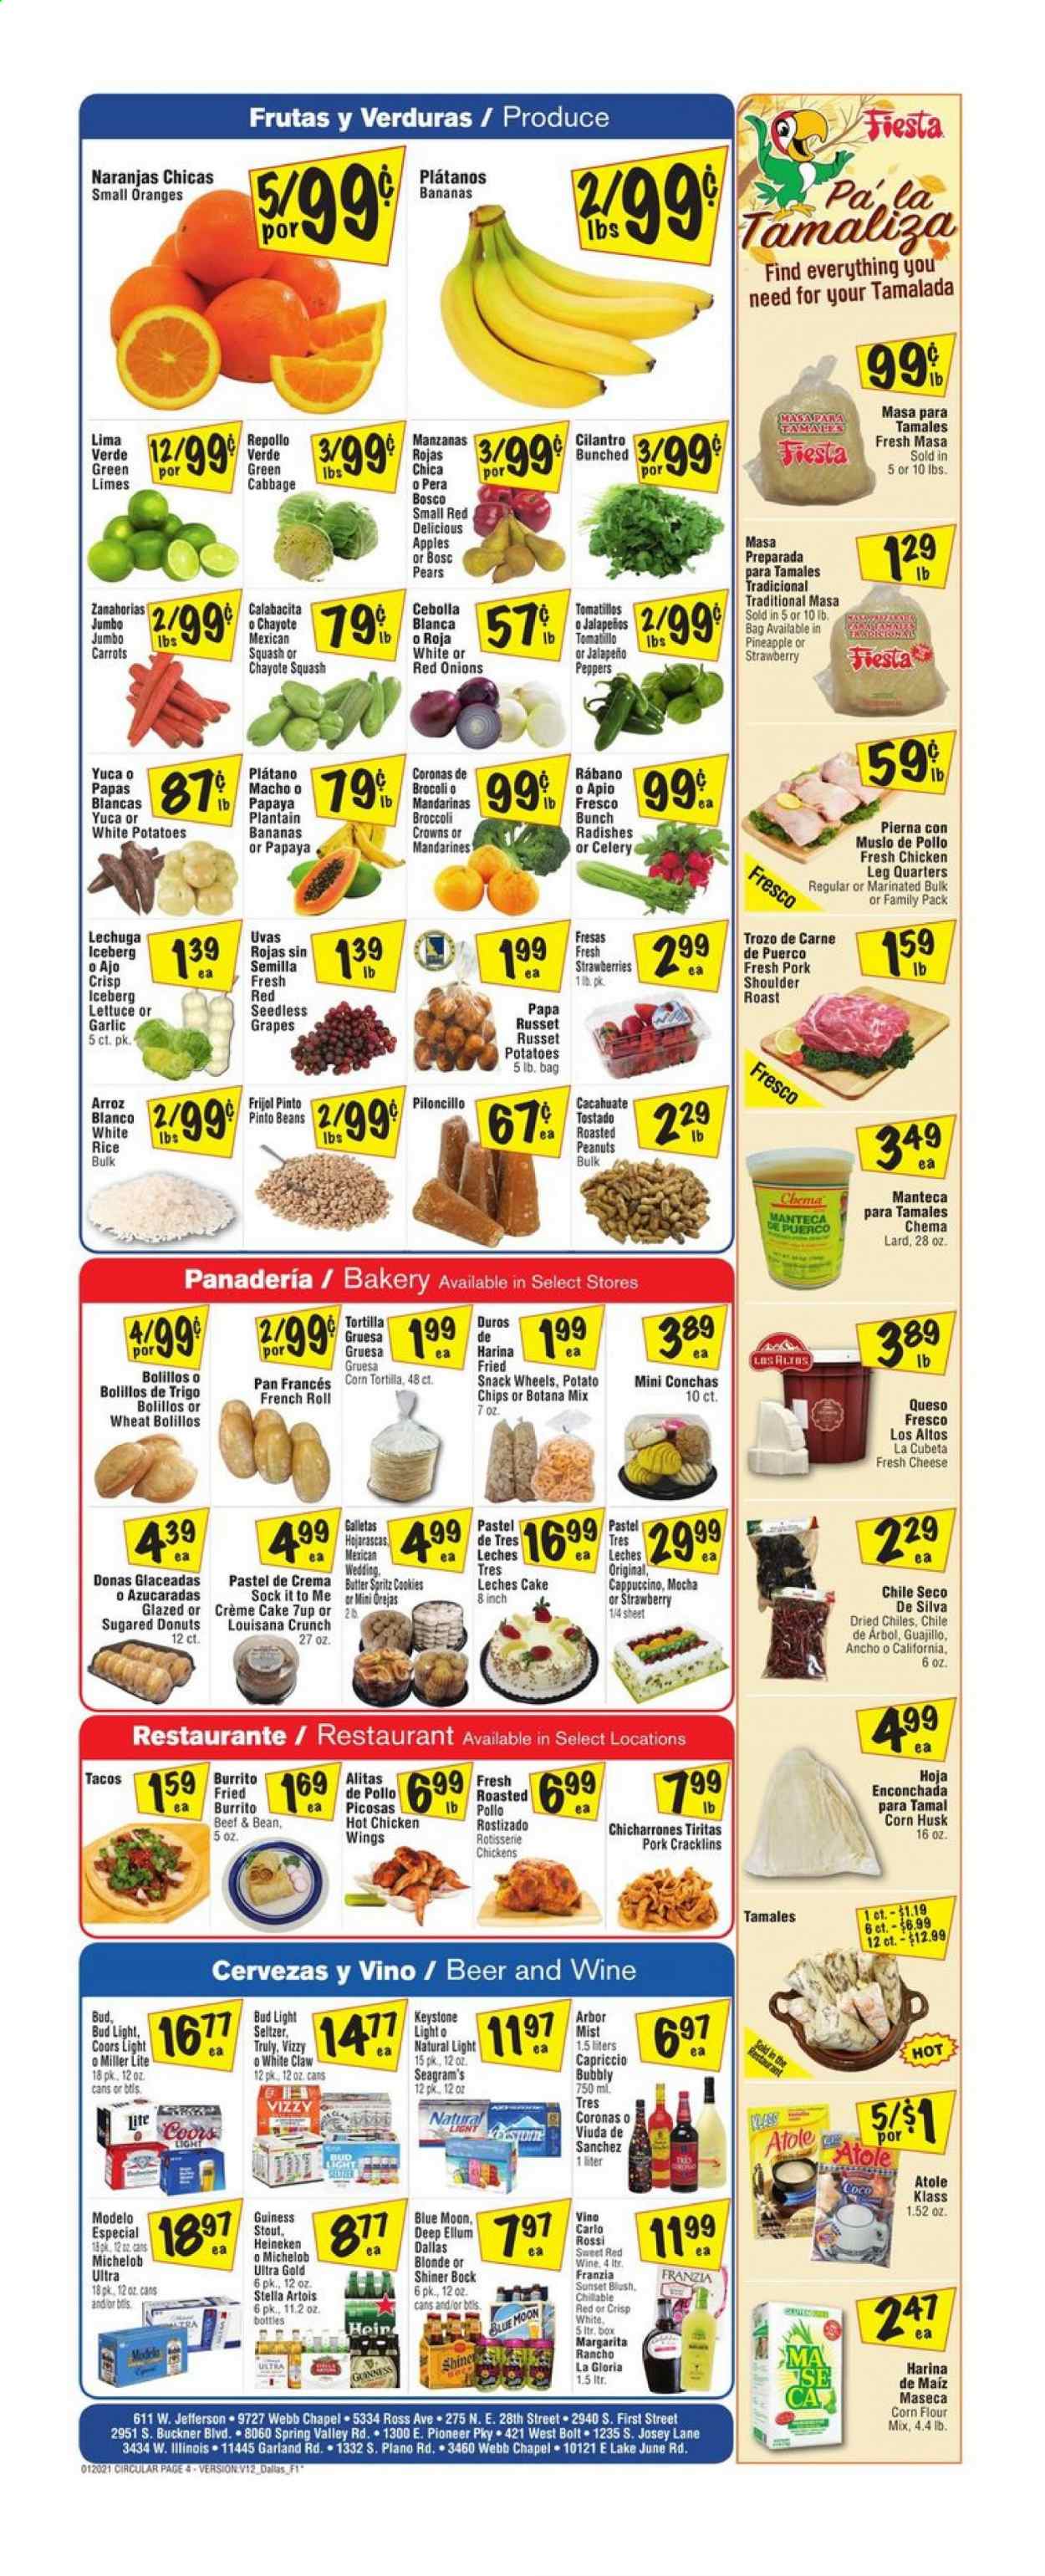 thumbnail - Fiesta Mart Flyer - 01/20/2021 - 01/26/2021 - Sales products - Miller Lite, Stella Artois, Coors, Blue Moon, Michelob, celery, tomatillo, lettuce, seedless grapes, papaya, tortillas, tacos, cake, donut, apples, bananas, pears, oranges, chayote, burrito, queso fresco, cheese, butter, lard, beans, carrots, strawberries, chicken wings, cookies, potato chips, chips, snack, flour, corn flour, garlic, mandarines, jalapeño, rice, pinto beans, white rice, cilantro, roasted peanuts, peanuts, 7UP, seltzer water, cappuccino, red wine, wine, White Claw, TRULY, beer, Bud Light, Heineken, Keystone, Modelo, pork meat, pork roast, pork shoulder, grapes, limes, Red Delicious apples. Page 4.